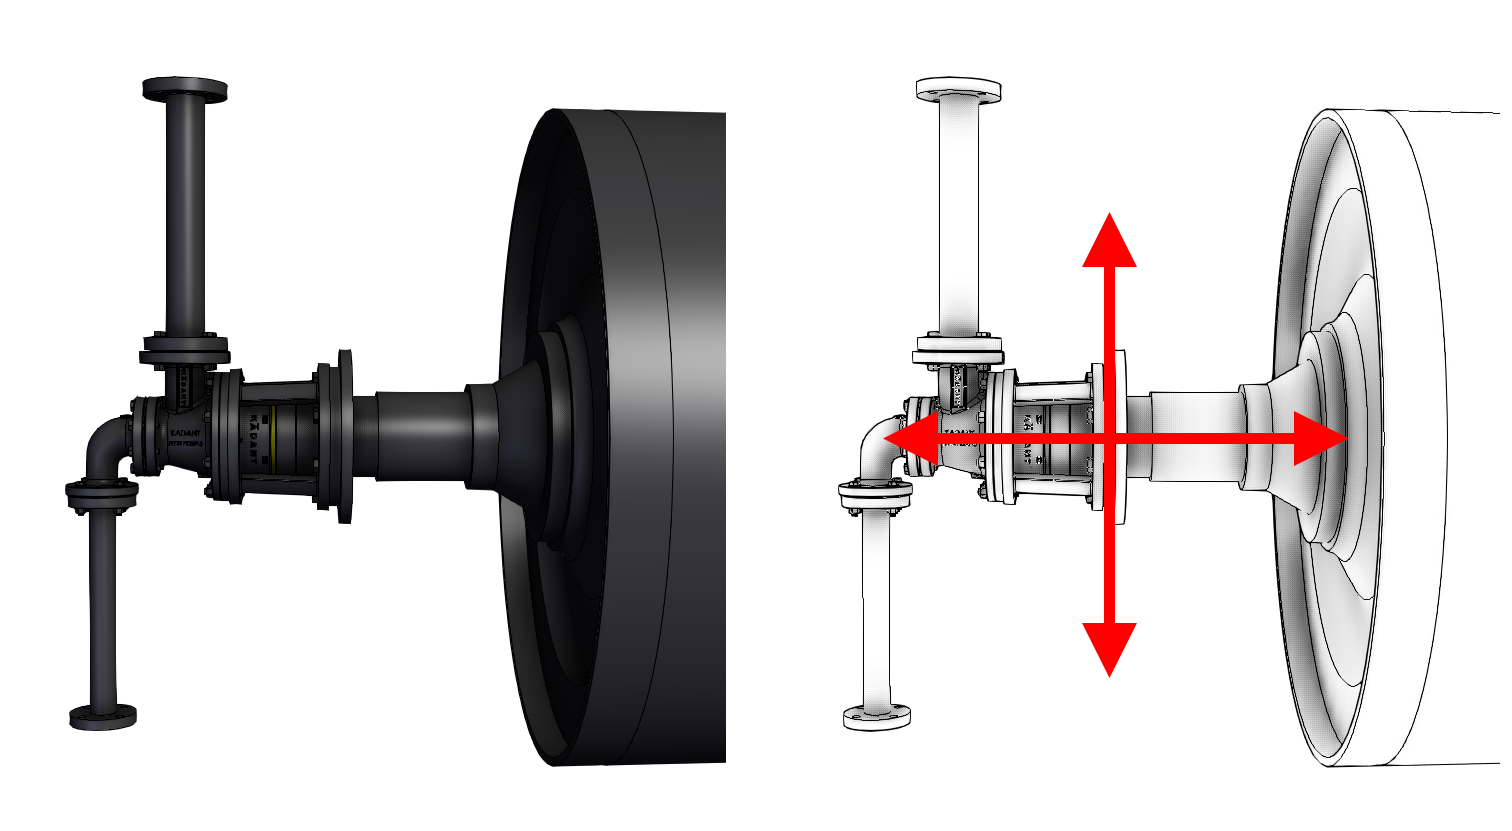 PROPER ALIGNMENT OF ROTARY JOINTS